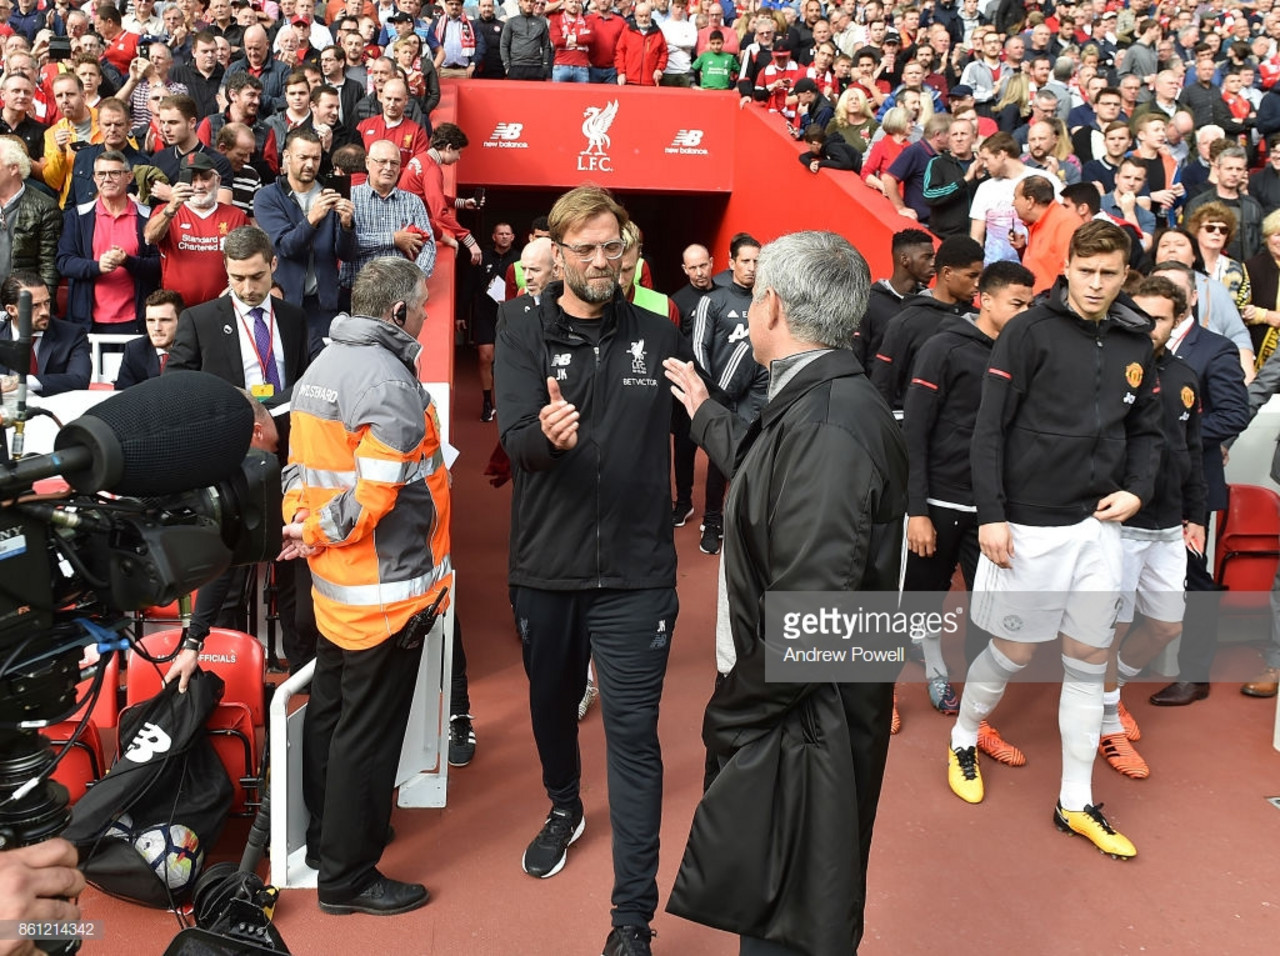 Jürgen Klopp: Liverpool will need to be 'angry' to claim victory against Manchester United 